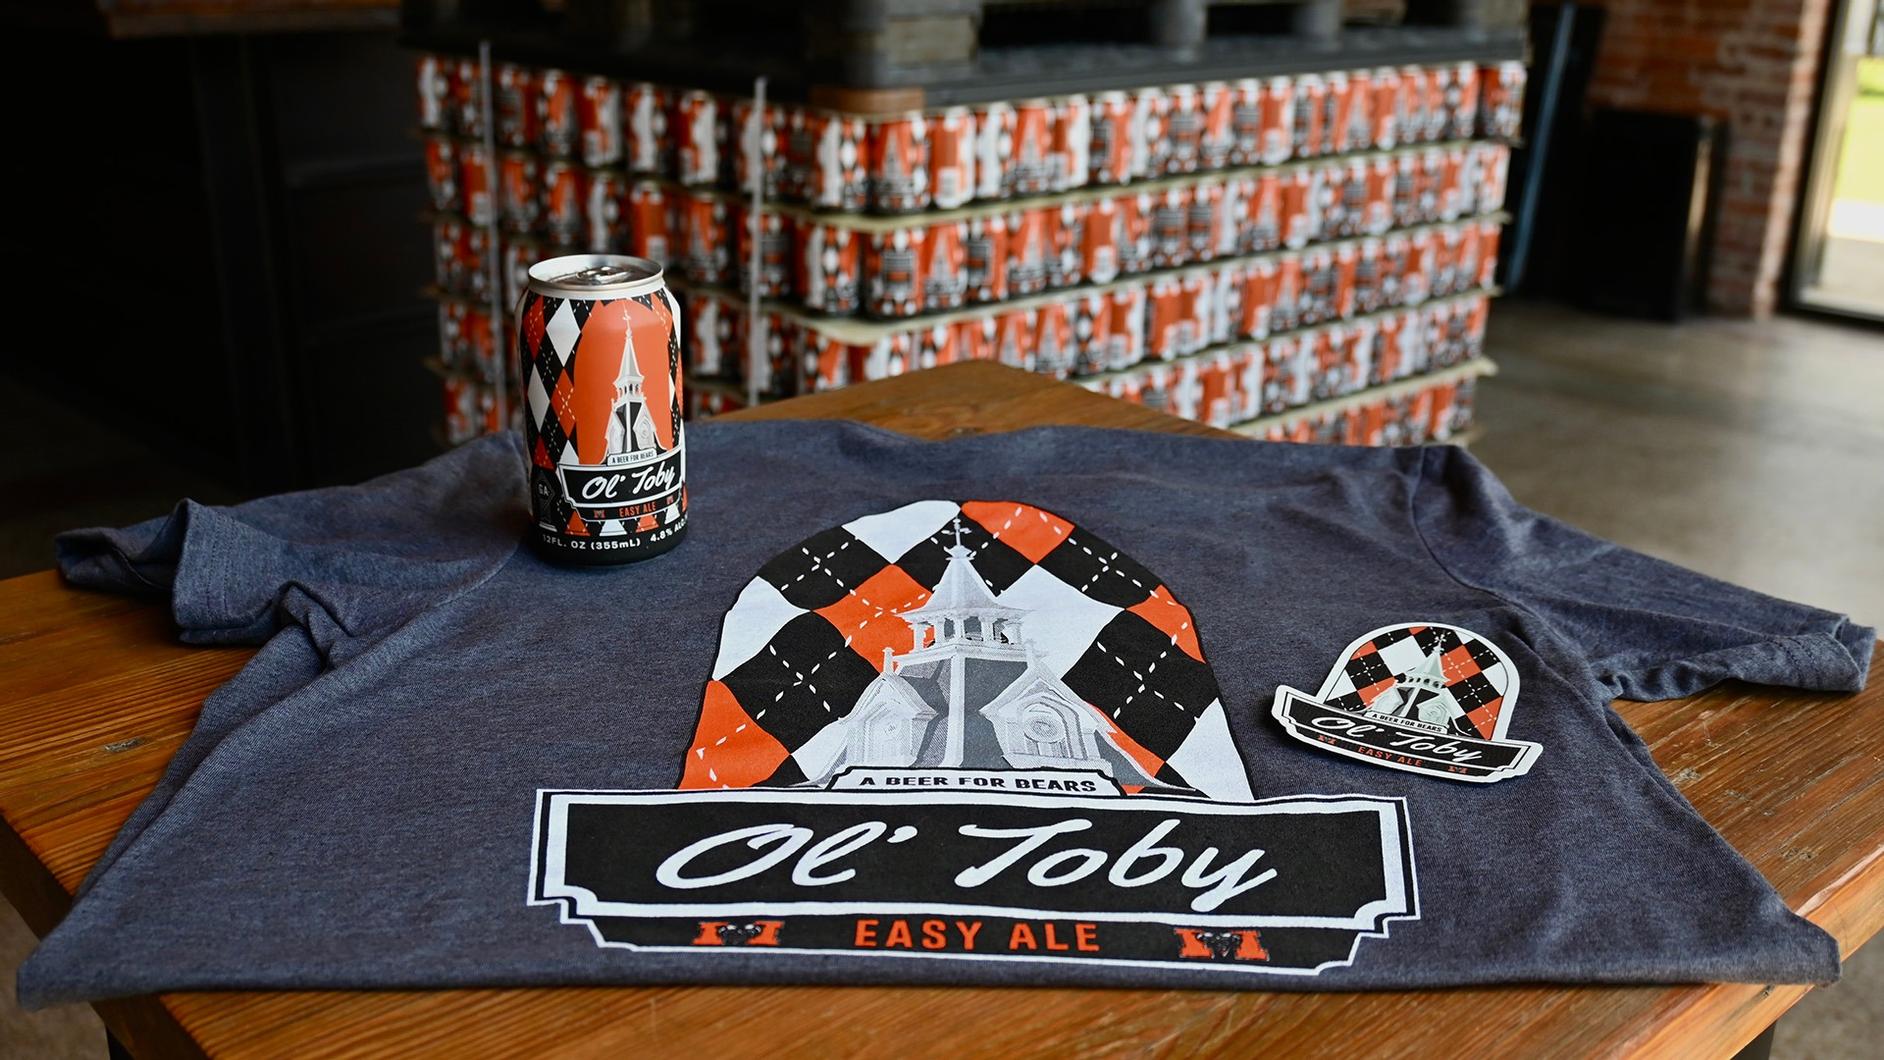 Fall Line to debut Sept. Toby Easy Ol\' 9 on Ale